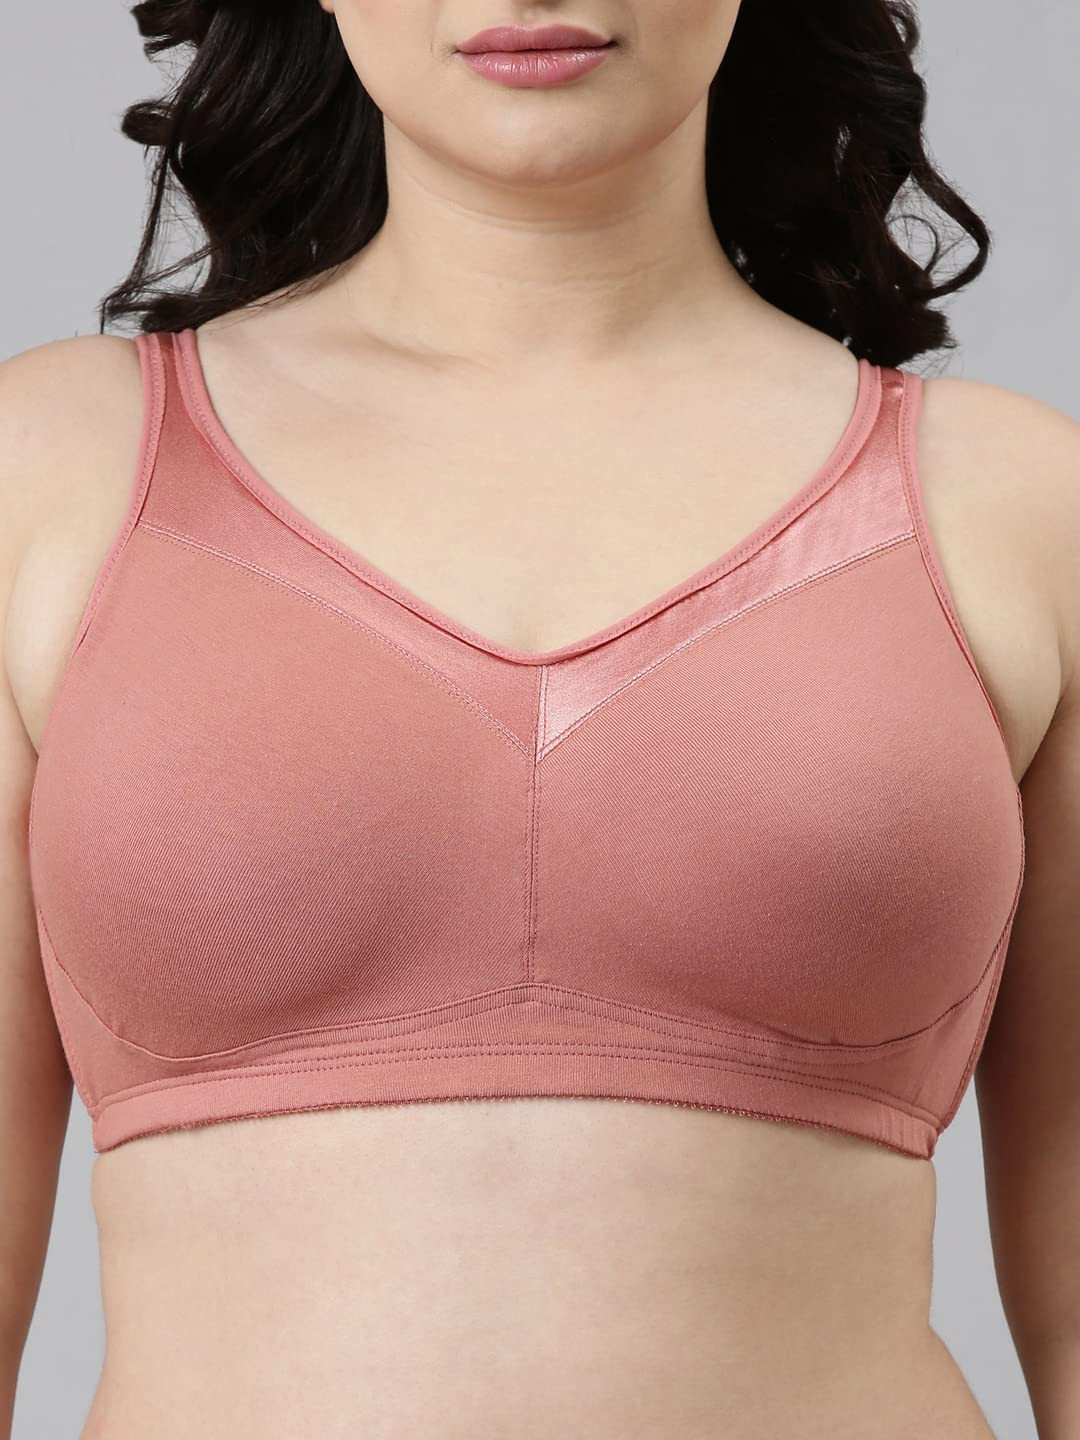 https://www.fastemi.com/uploads/fastemicom/products/enamor-a112-full-support-minimizer-cotton-bra-for-women-non-padded-non-wired-amp-full-coverage-with-seamless-cupa112-rosette-40dsize-40d-234468162866108_l.jpg